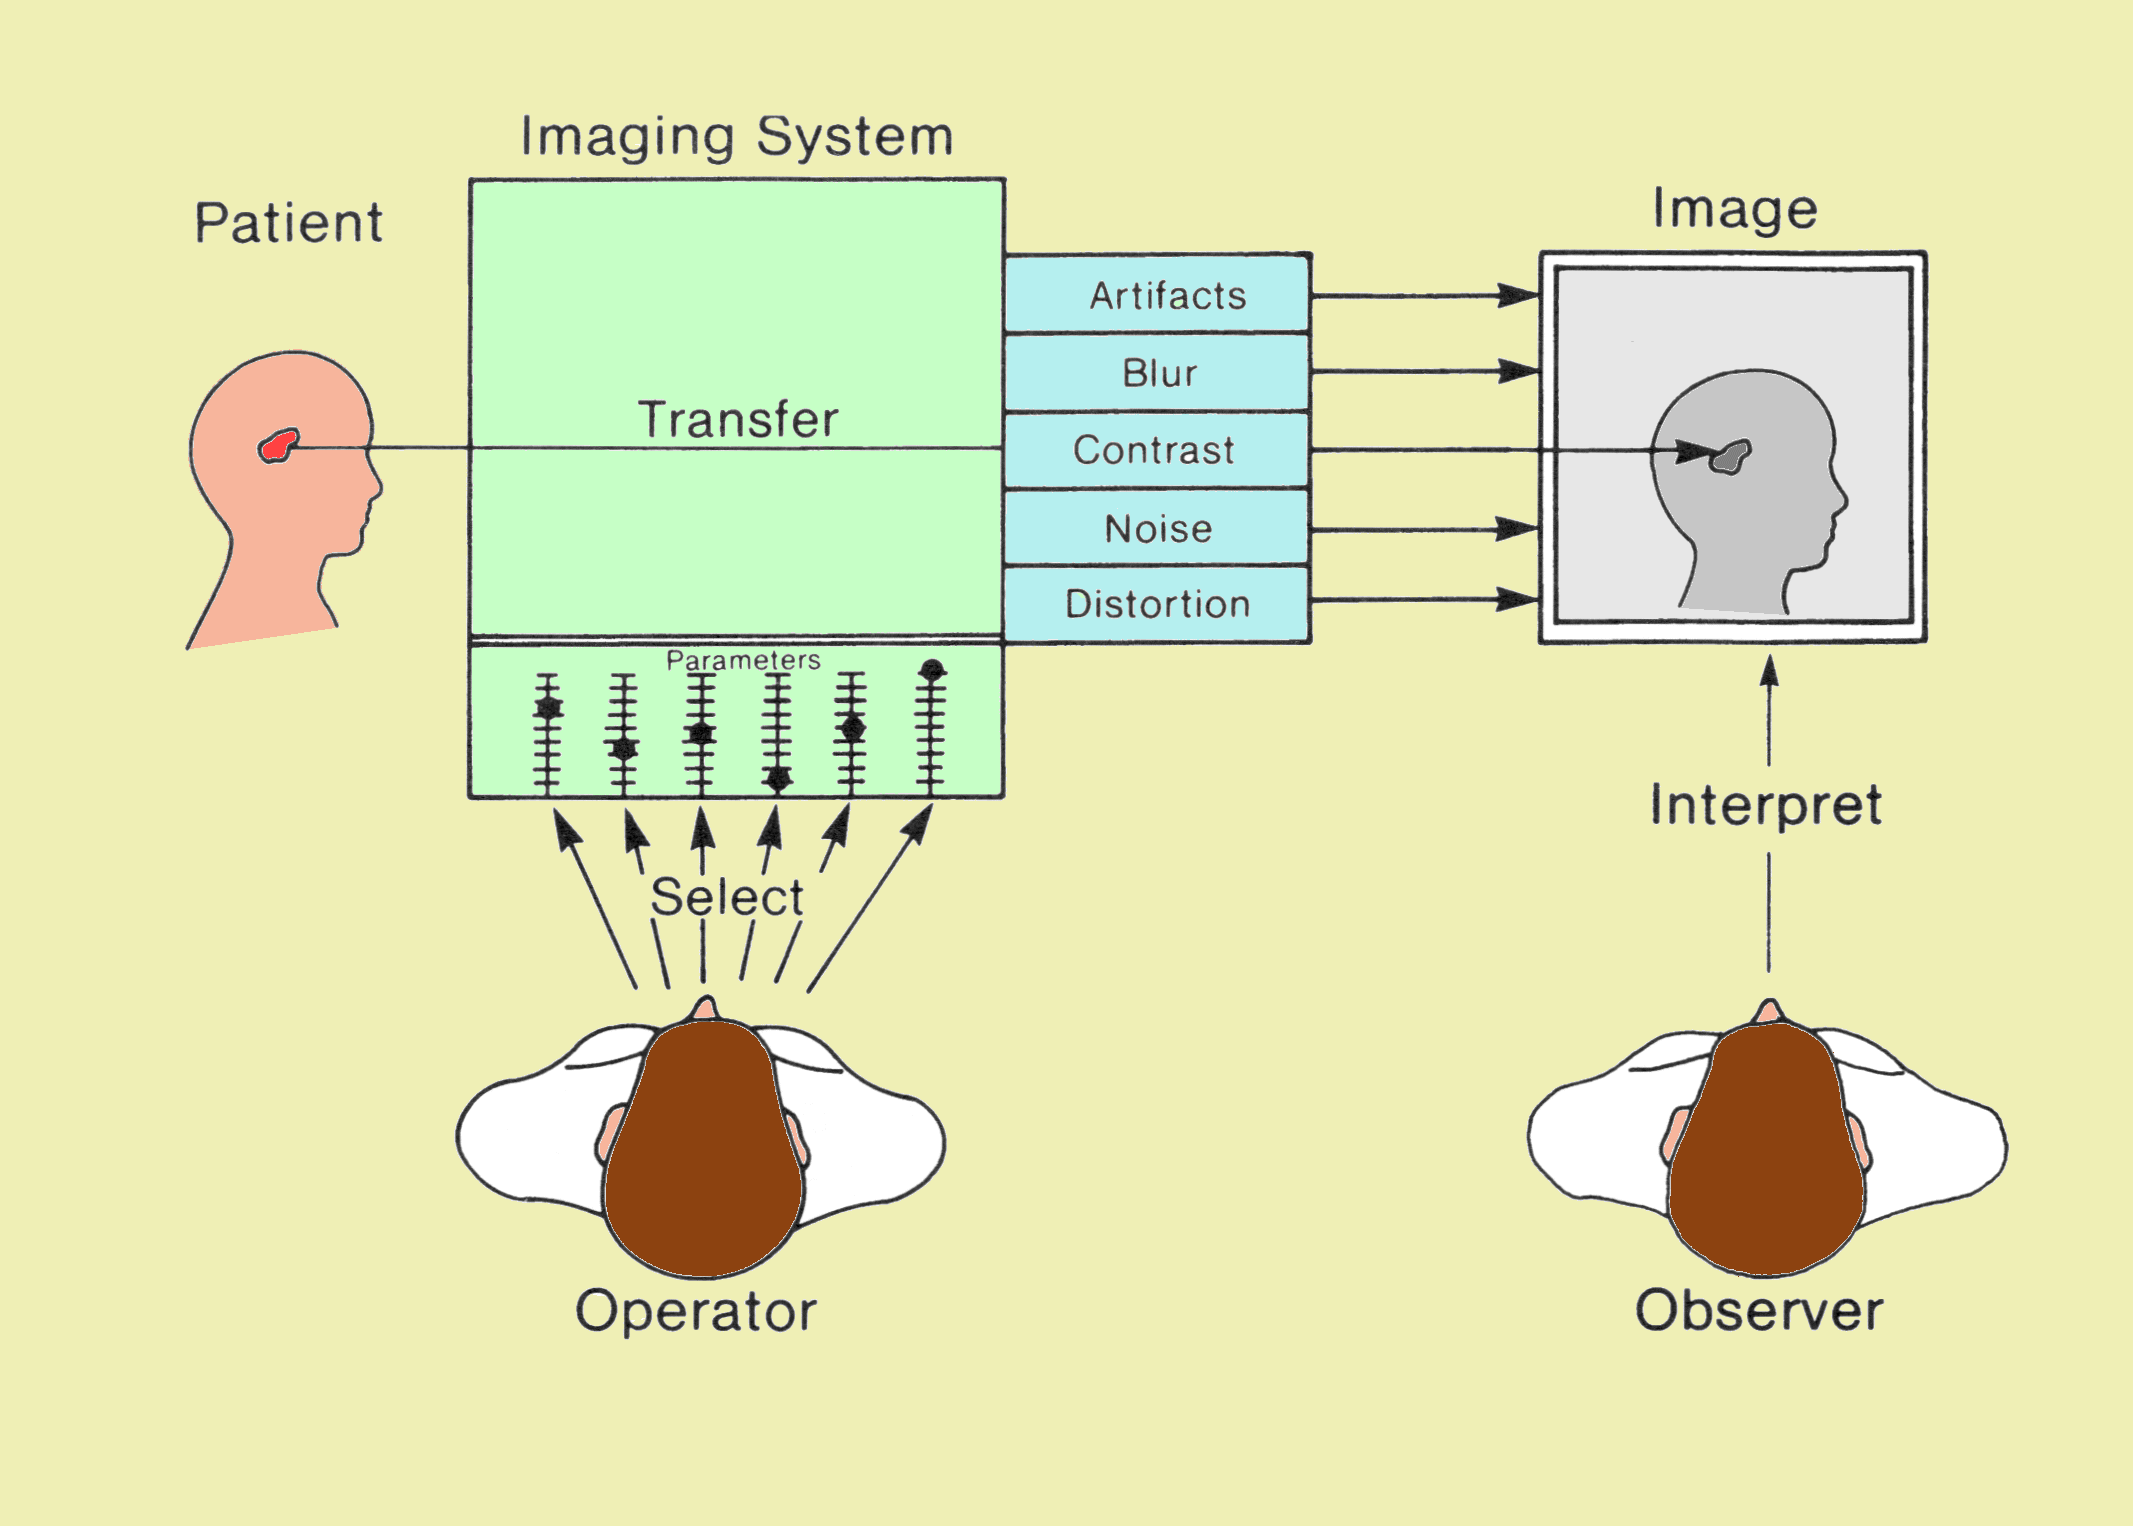 Components Associated with the Medical Imaging Process